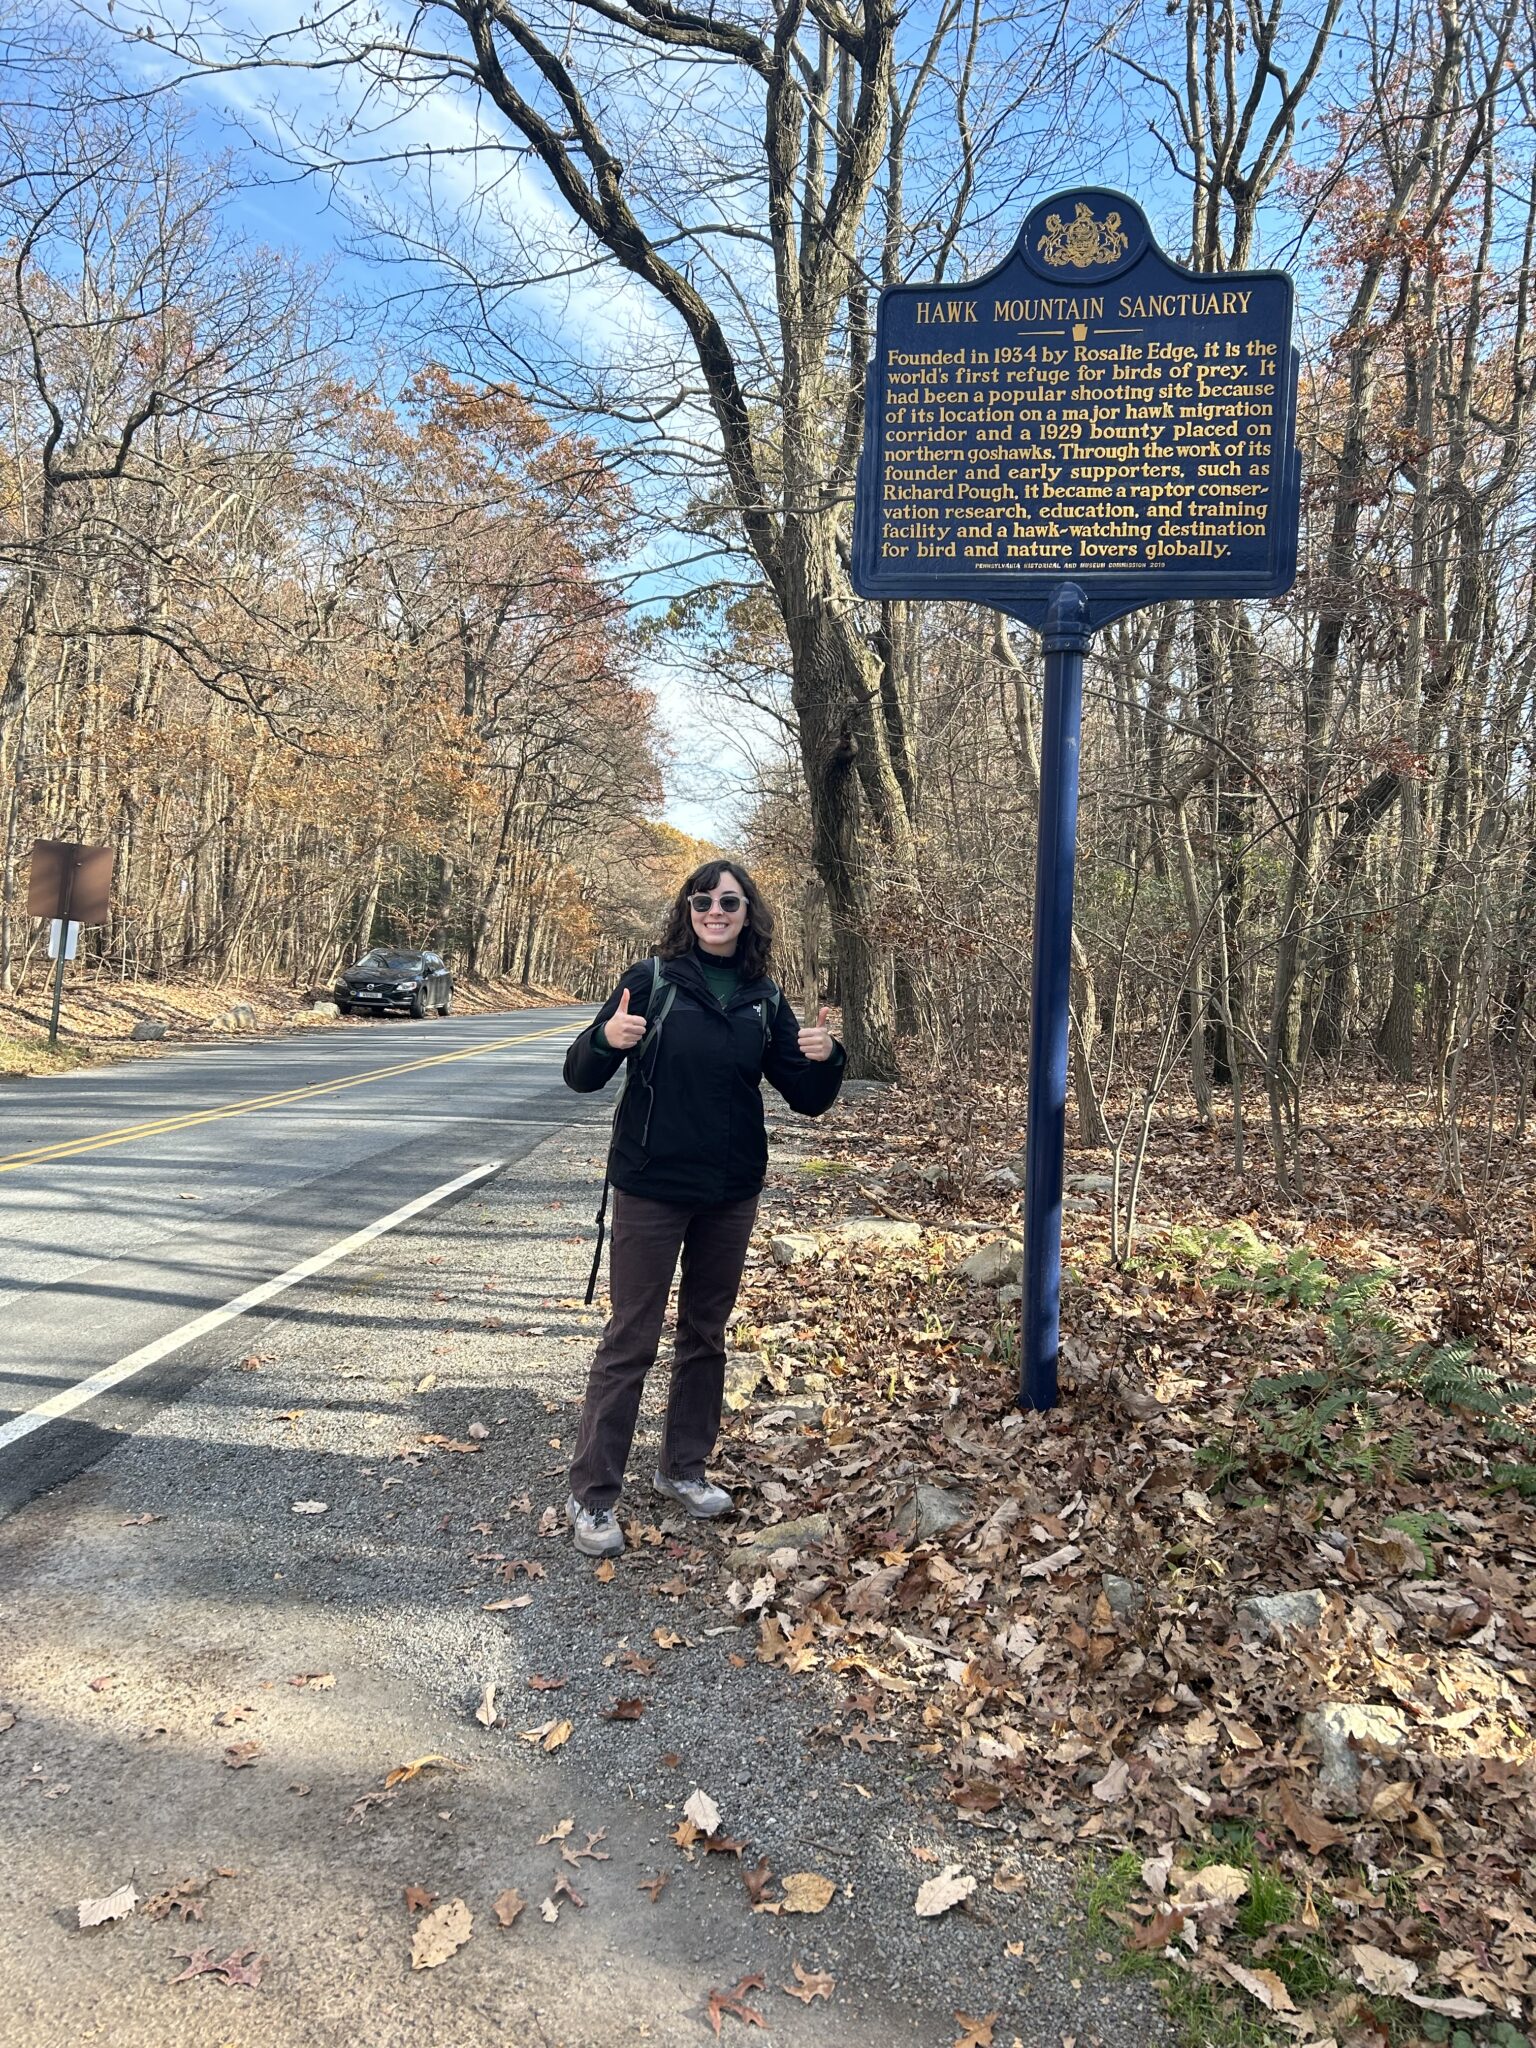 Brooke Goodman gives two thumbs up as she stands next to a roadside sign for the Hawk Mountain Sanctuary.